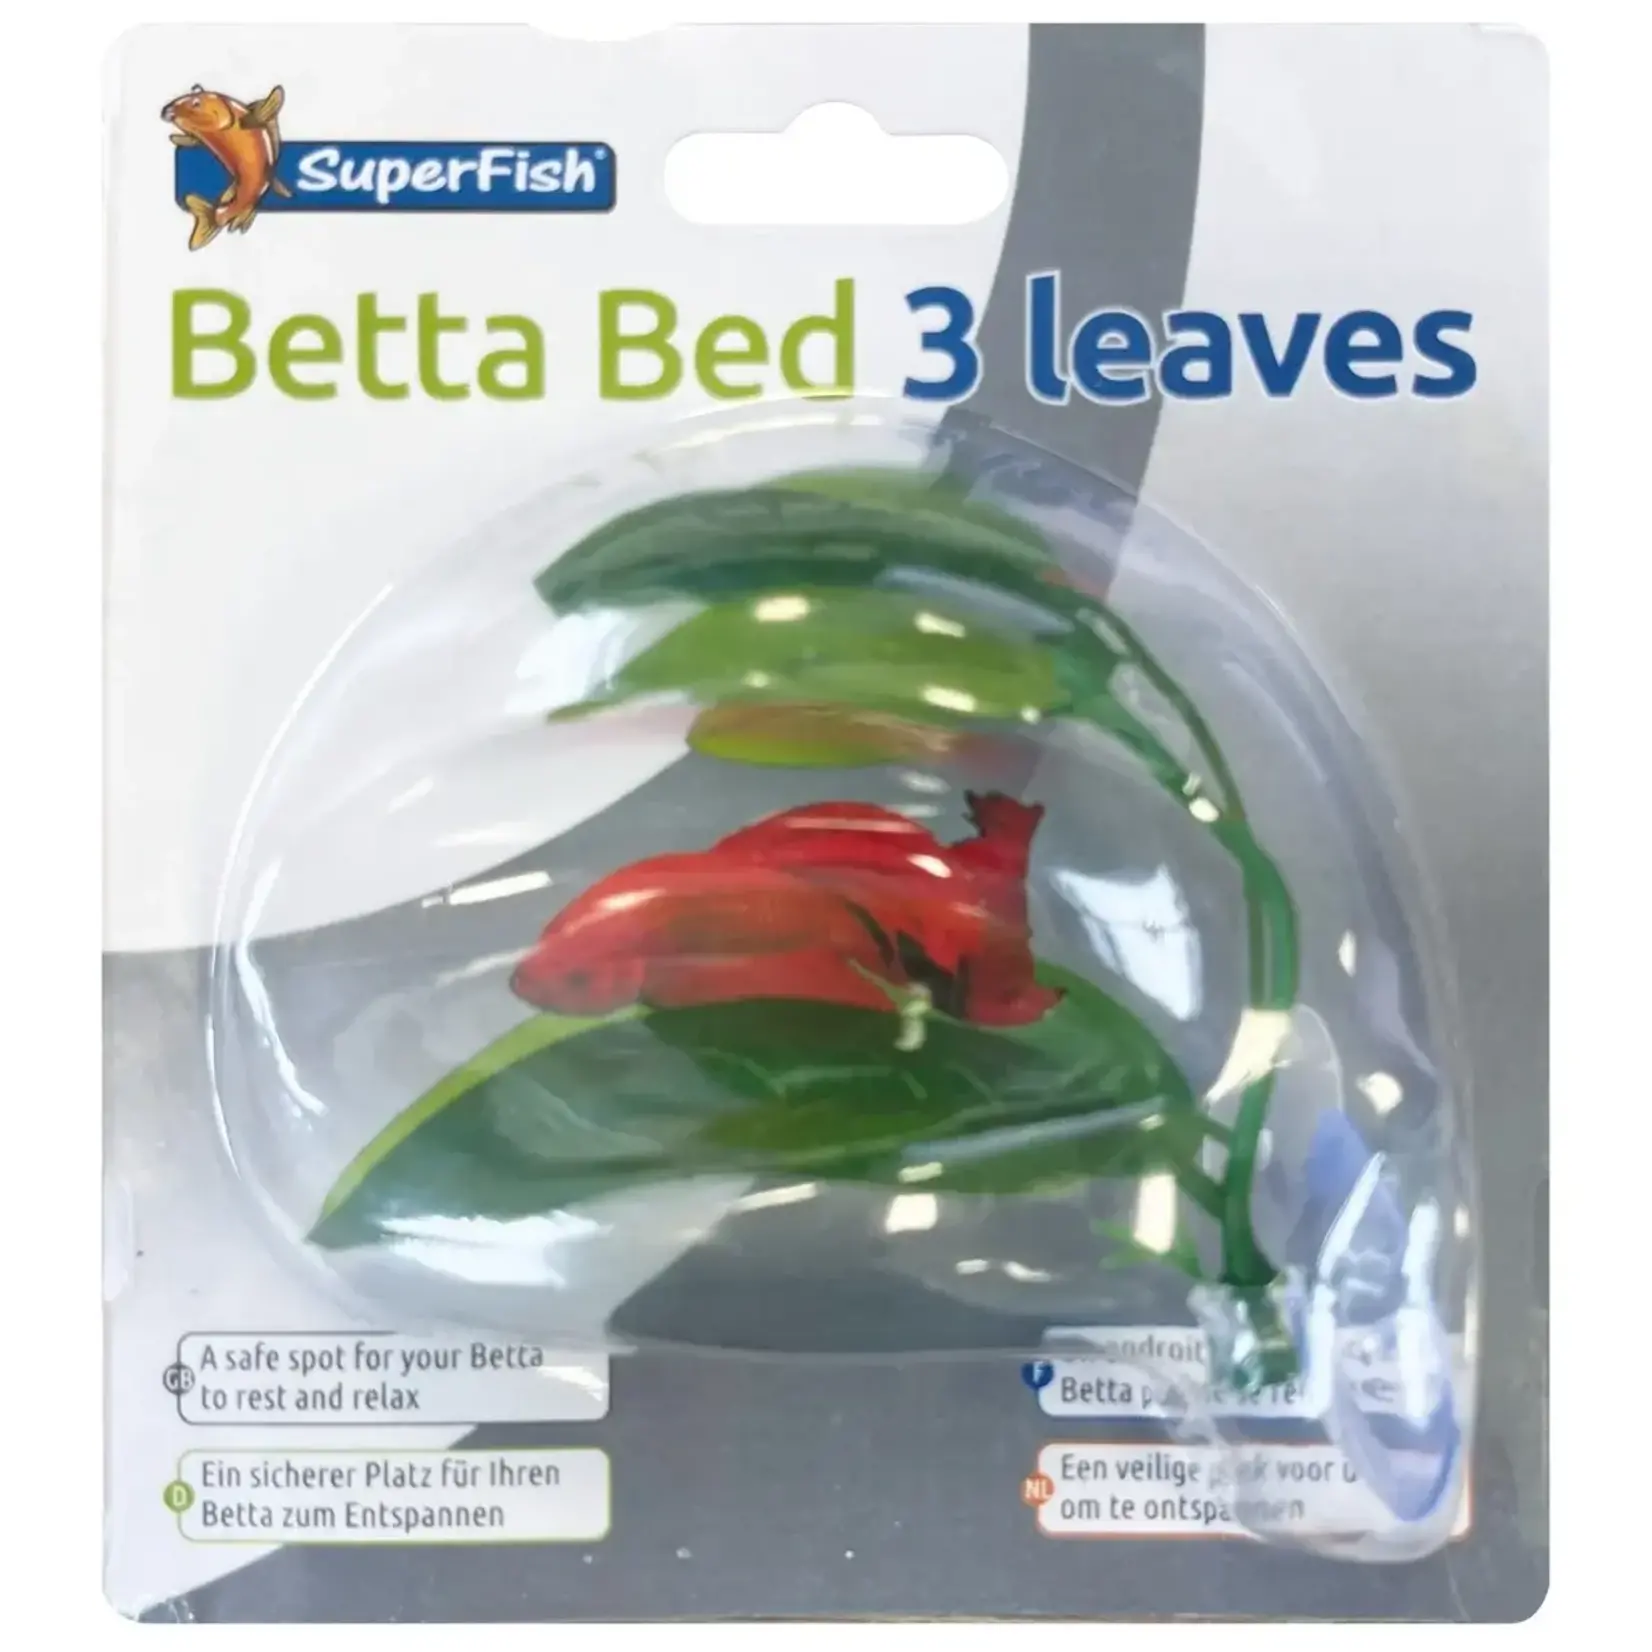 SuperFish Betta bed 3 leaves